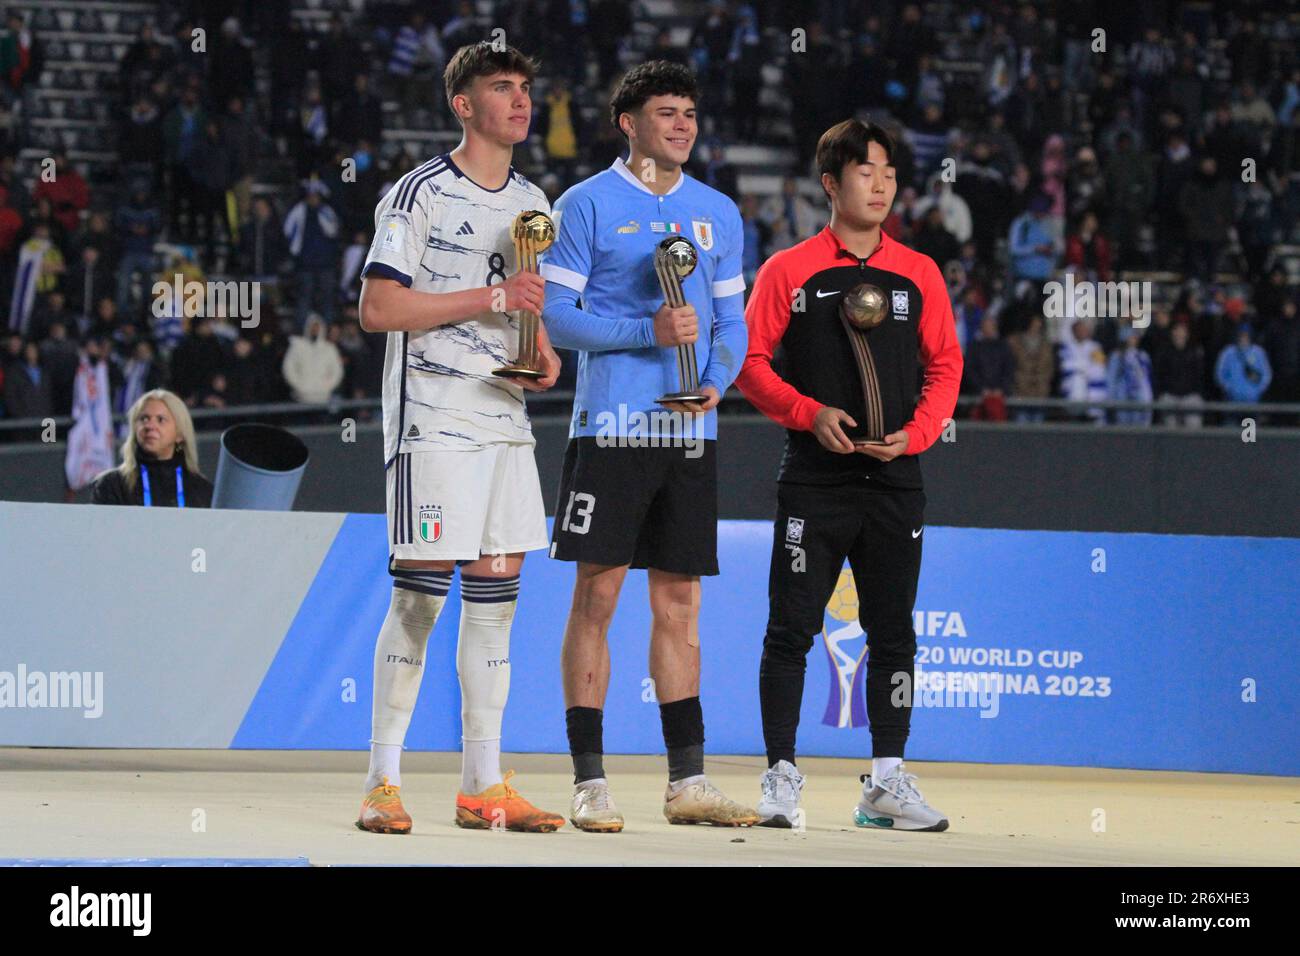 La Plata, Argentina. 11th June, 2023. Italy's midfielder Cesare Casadei (L), Uruguay's defender Alan Matturro (C) and South Korean midfielder Lee Seungwon (R) pose for a picture with the adidas Golden, Silver and Bronze Ball Award respectively after the end of the Argentina 2023 U-20 World Cup final match between Uruguay and Italy, at Ciudad de La Plata Stadium, in La Plata, Argentina on June 11. Photo: Pool Pelaez Burga/DiaEsportivo/DiaEsportivo/Alamy Live News Credit: DiaEsportivo/Alamy Live News Stock Photo